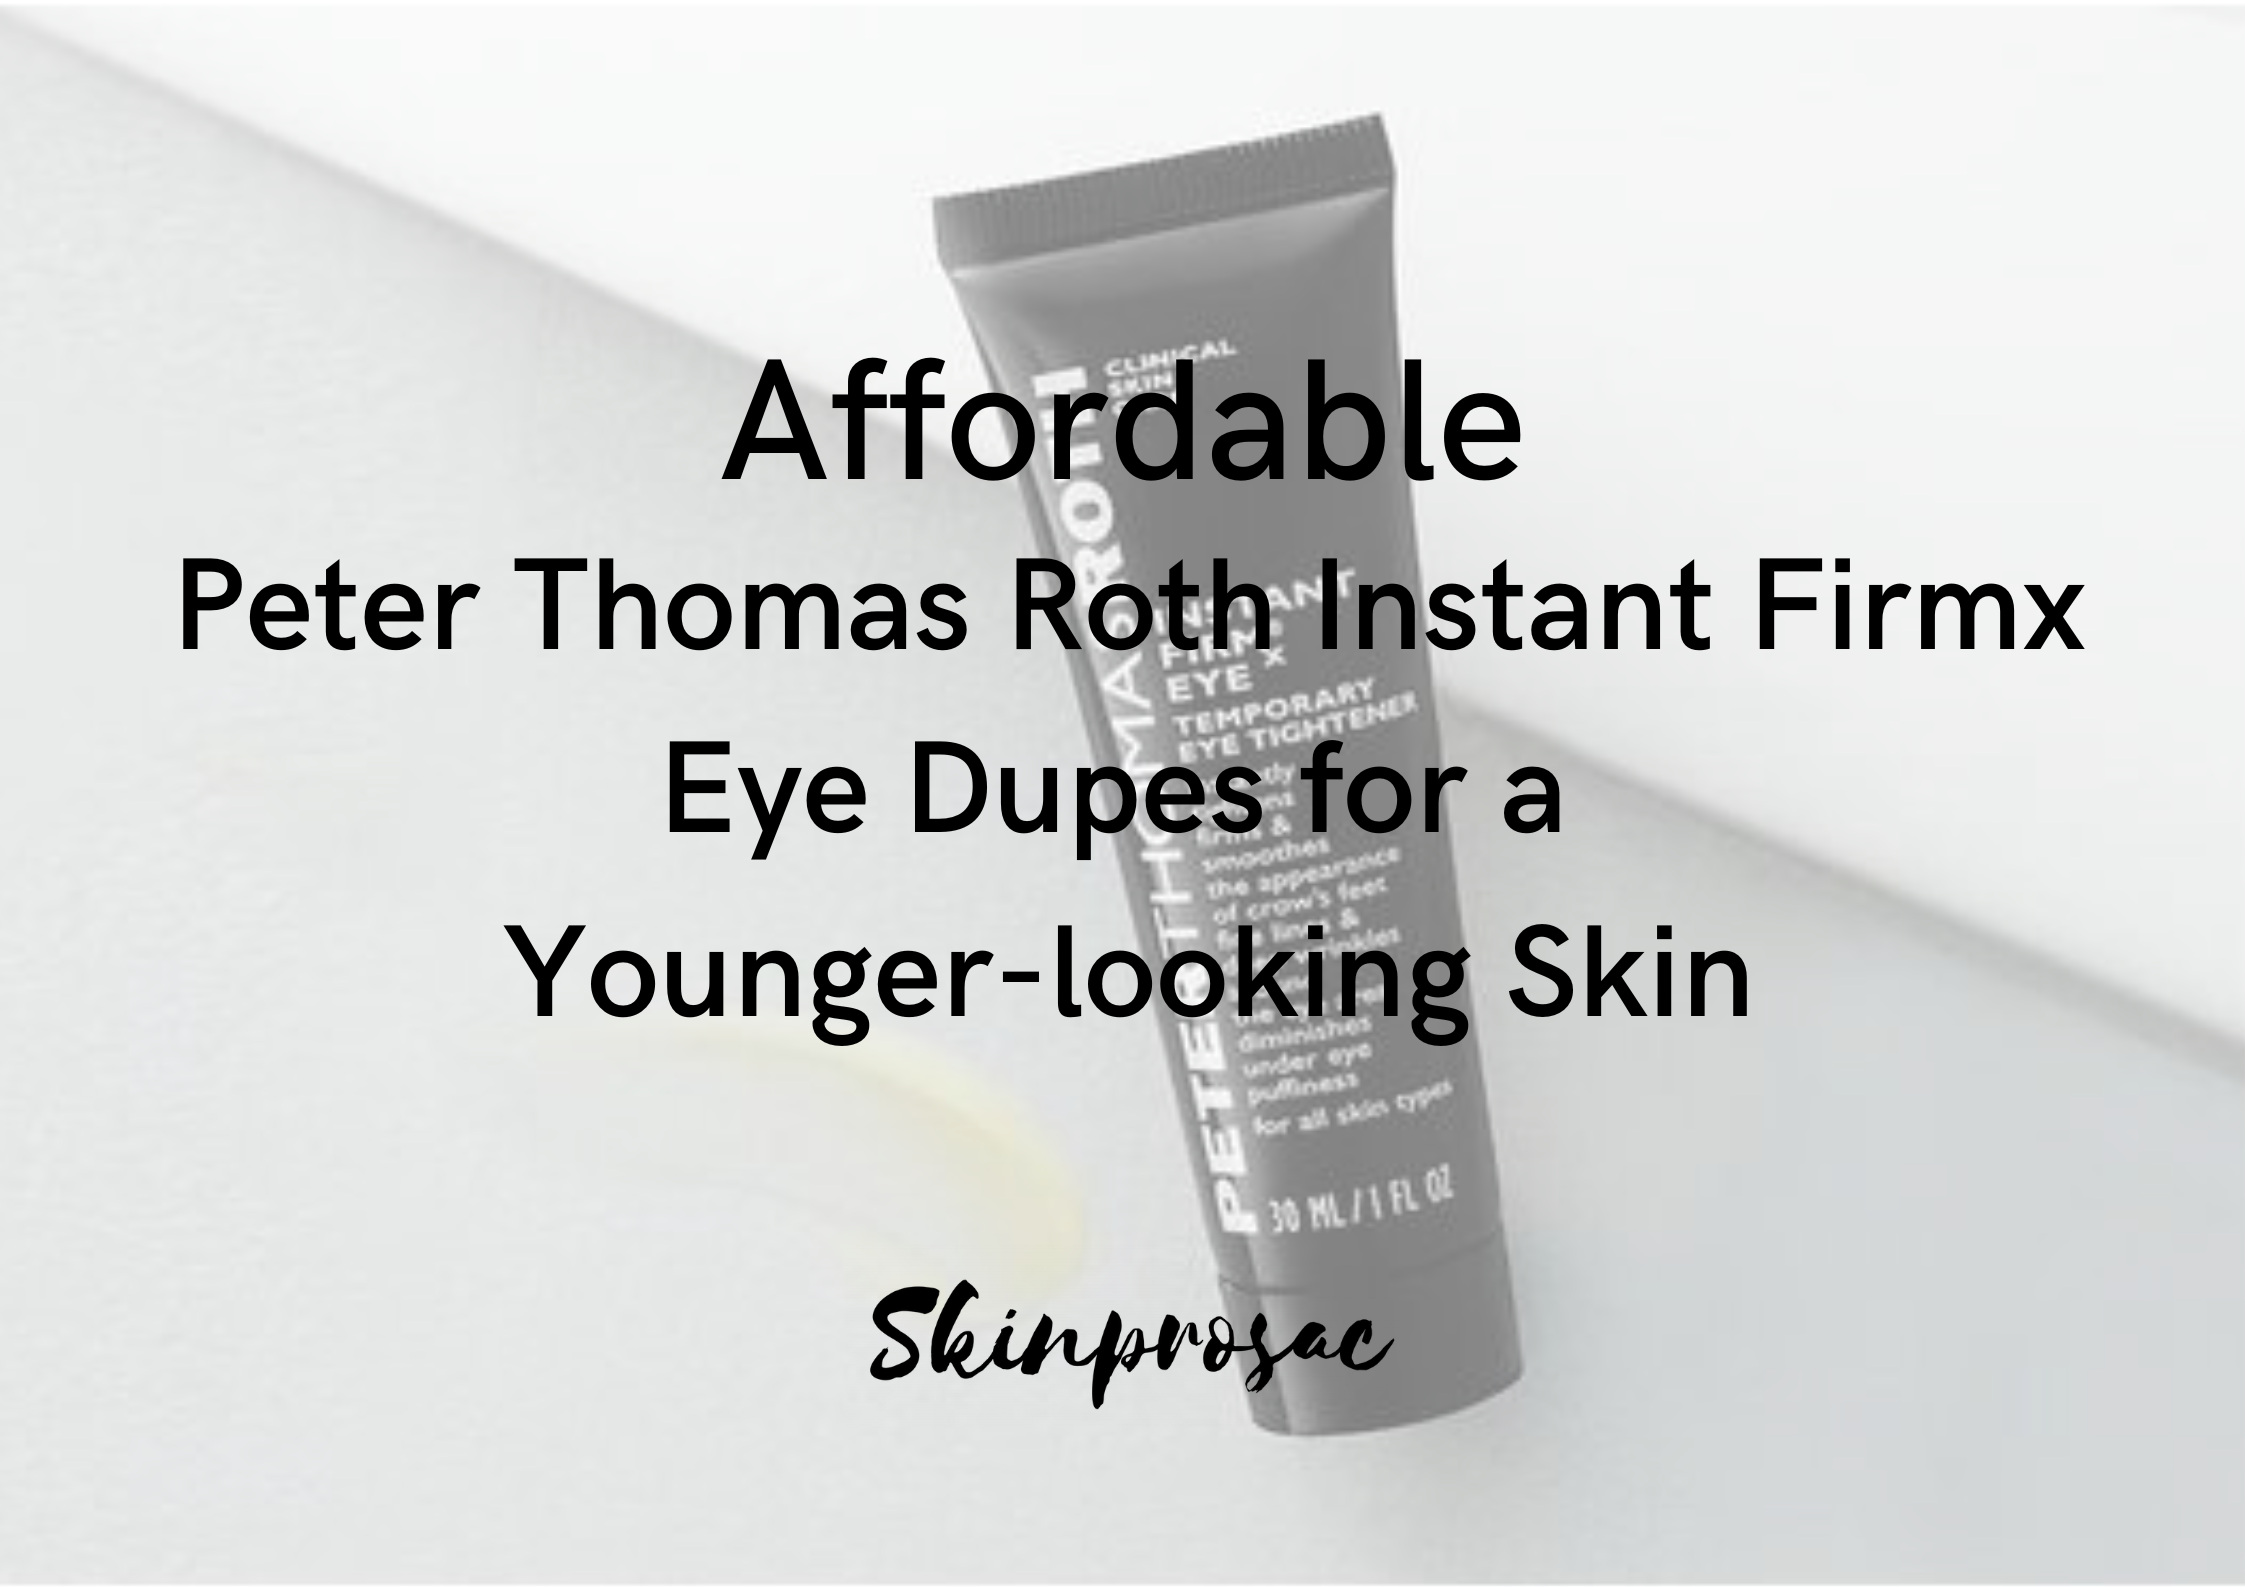 Peter Thomas Roth Instant Firmx Eye dupe